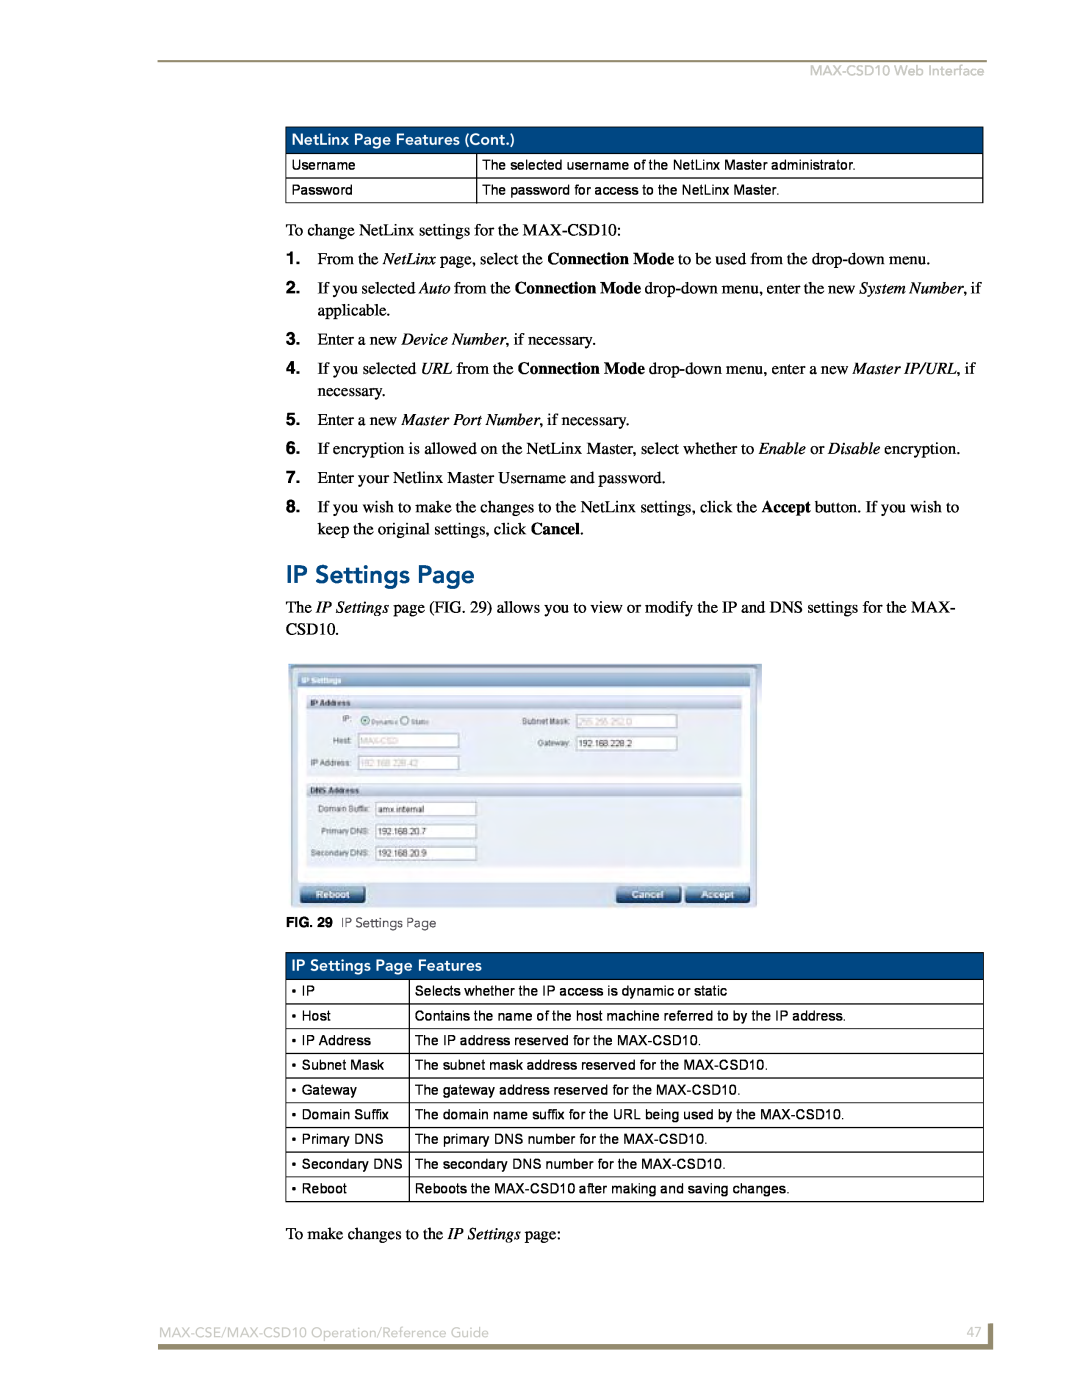 AMX MAX-CSD 10, MAX-CSE manual IP Settings Page, To change NetLinx settings for the MAX-CSD10 